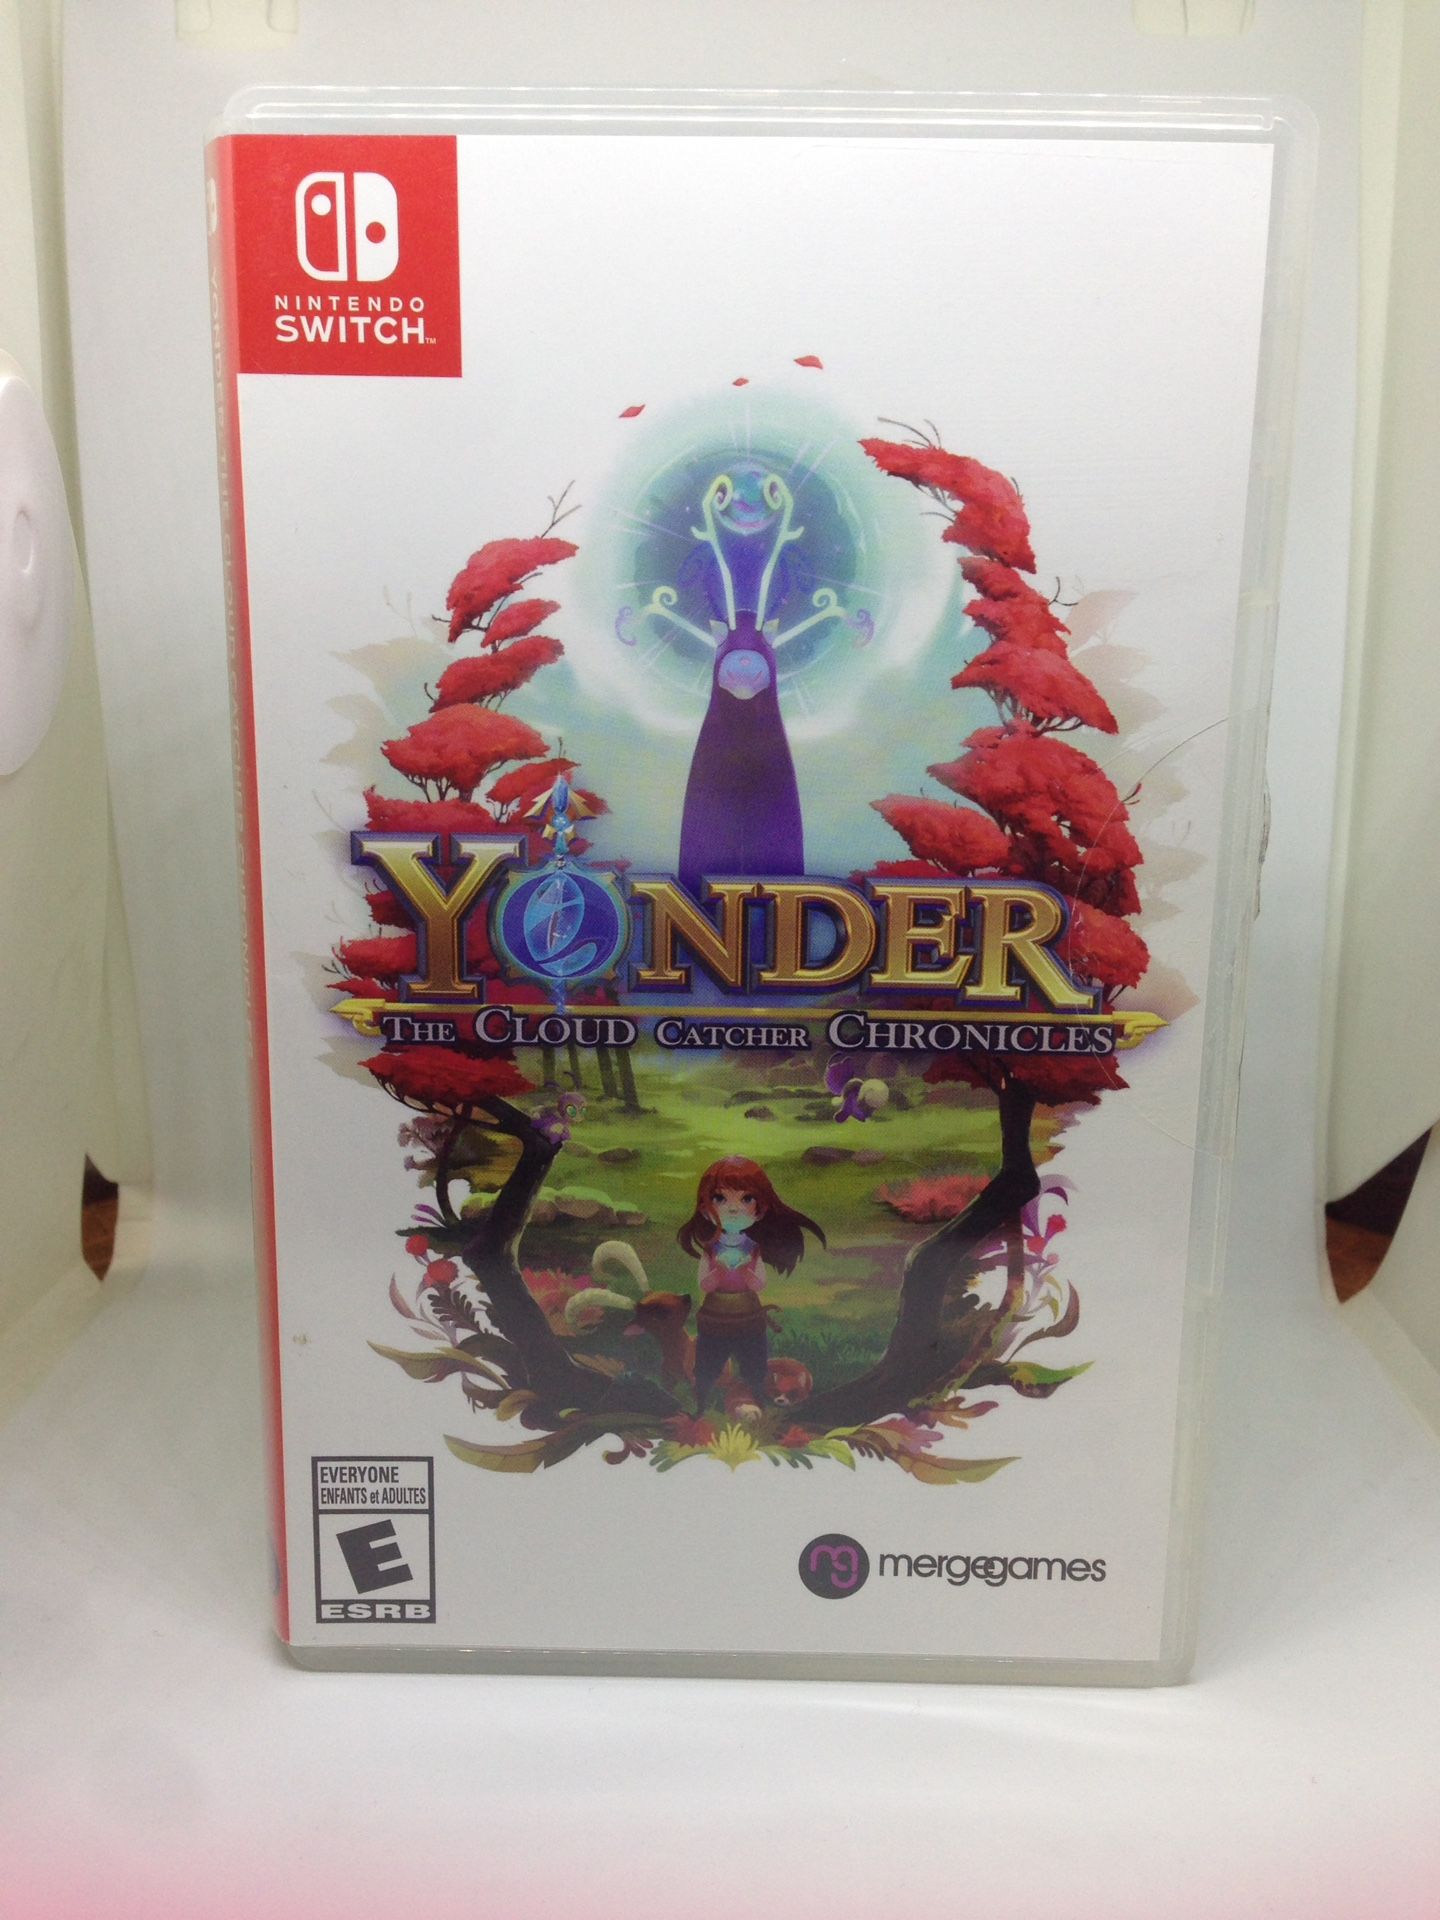 Yonder: The Cloud Catcher Chronicles For the Nintendo Switch